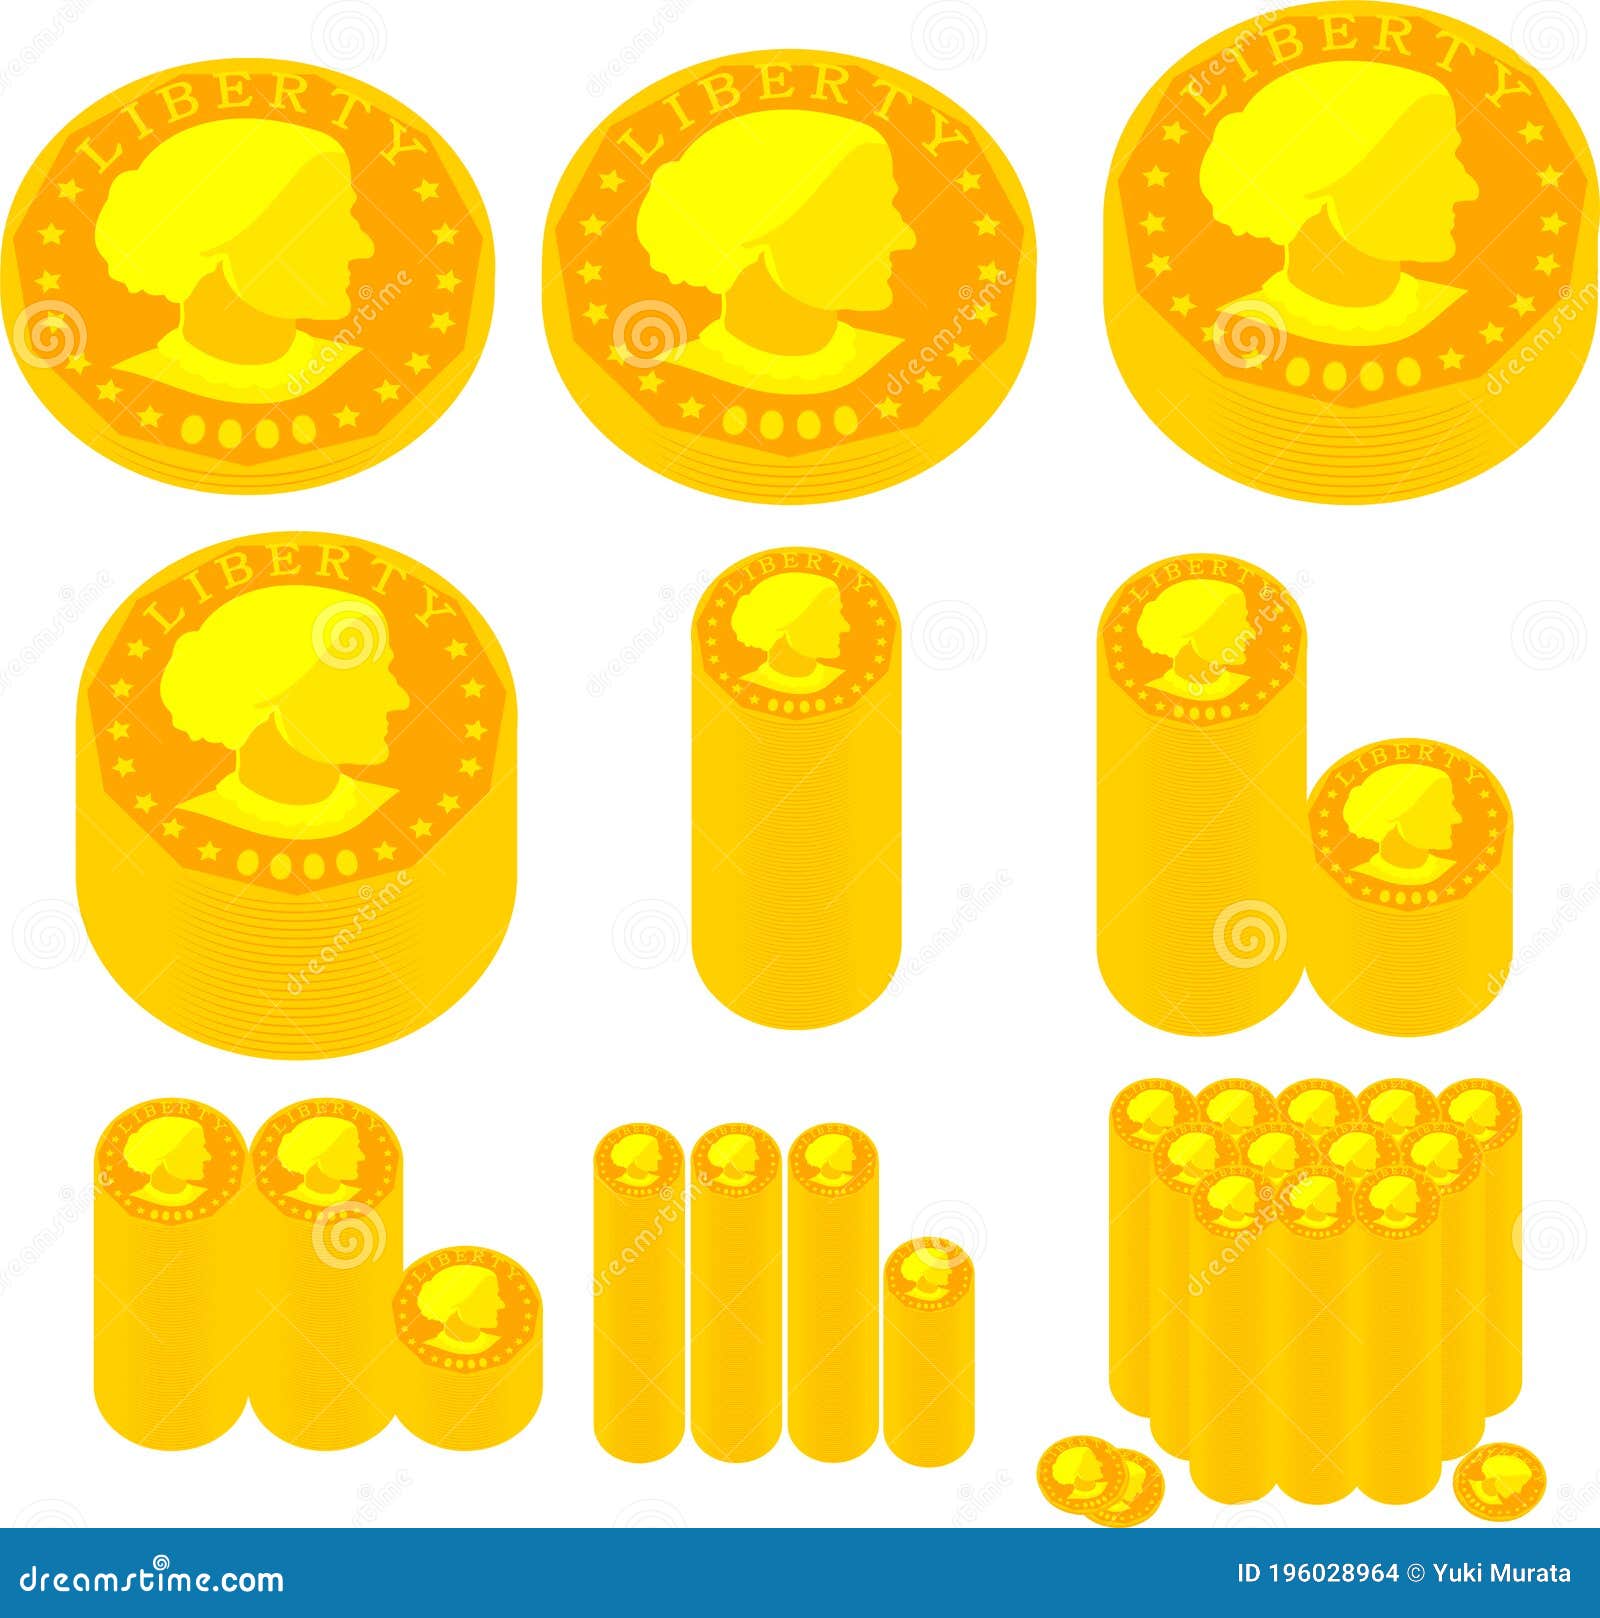 Golden Bundle of US American 100 Cent Coin Set Stock Vector ...